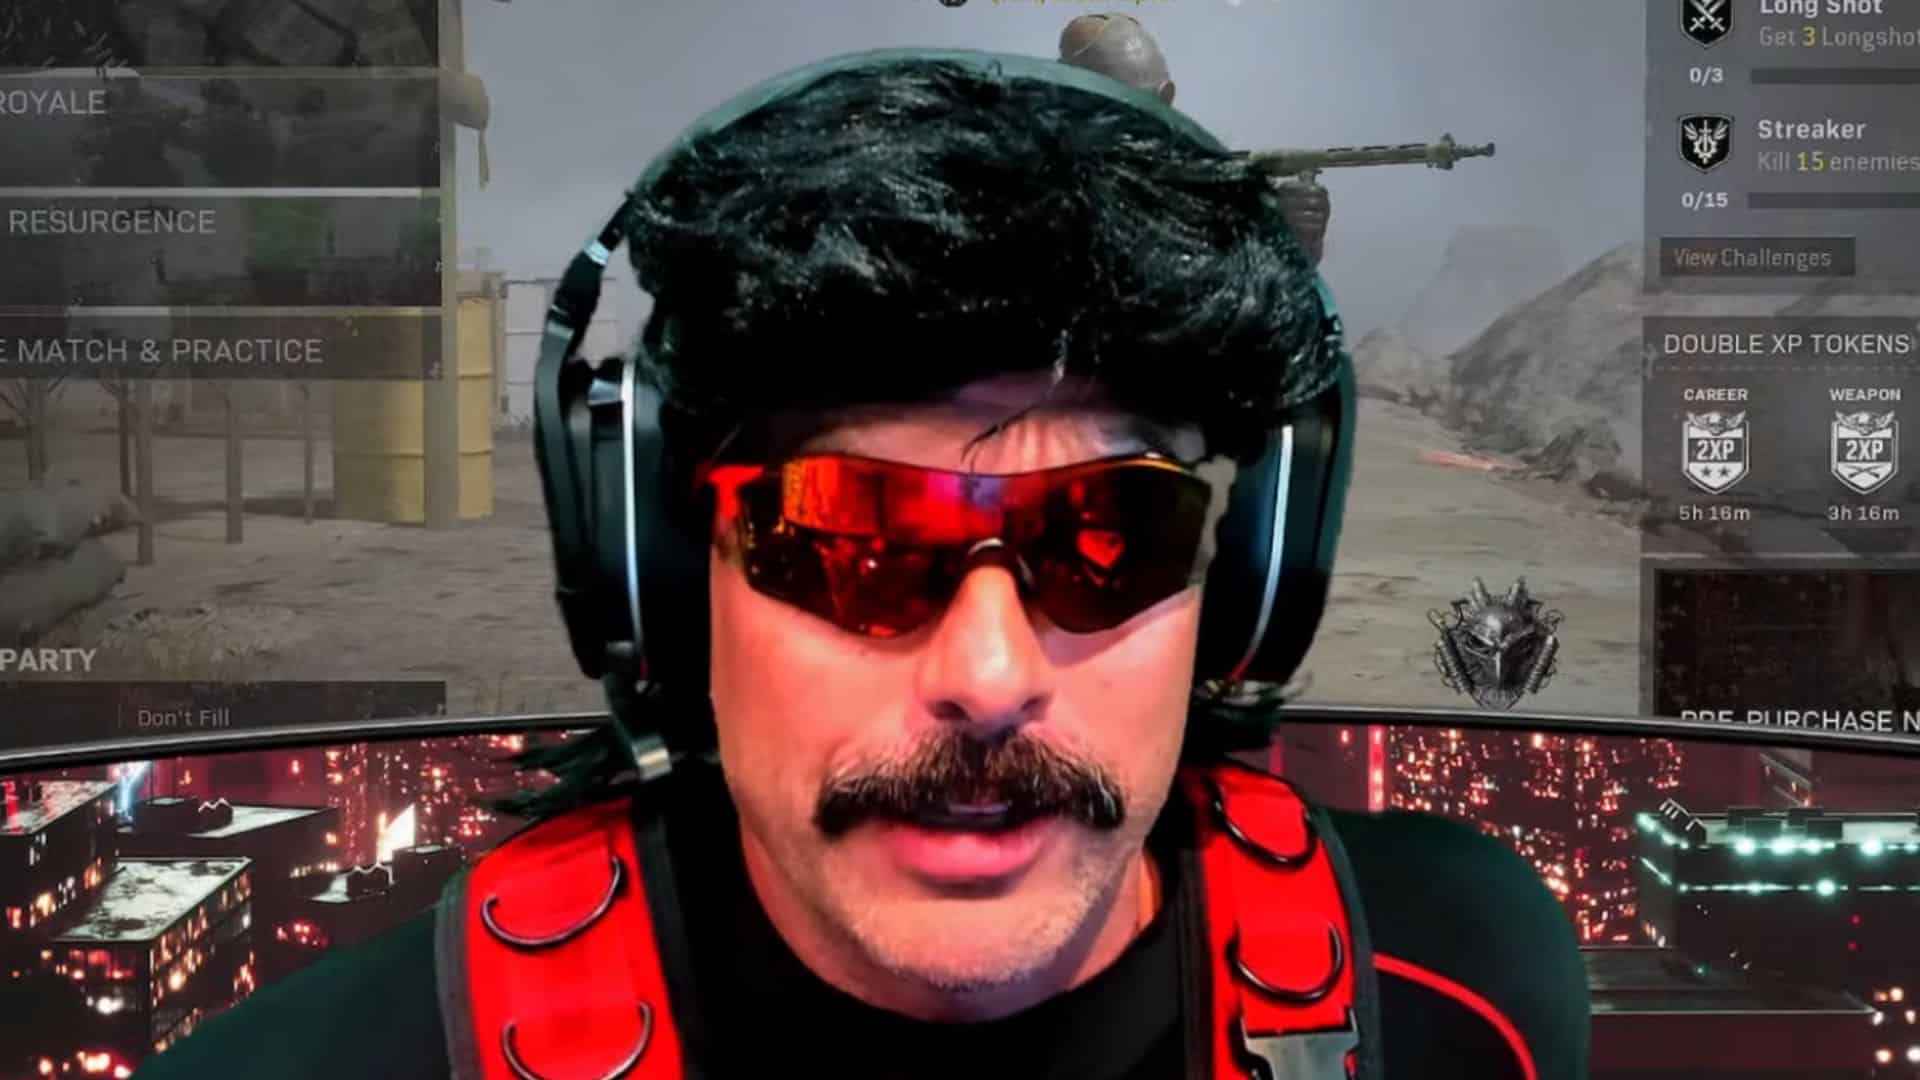 Dr Disrespect talking to camera with Warzone lobby screen in background